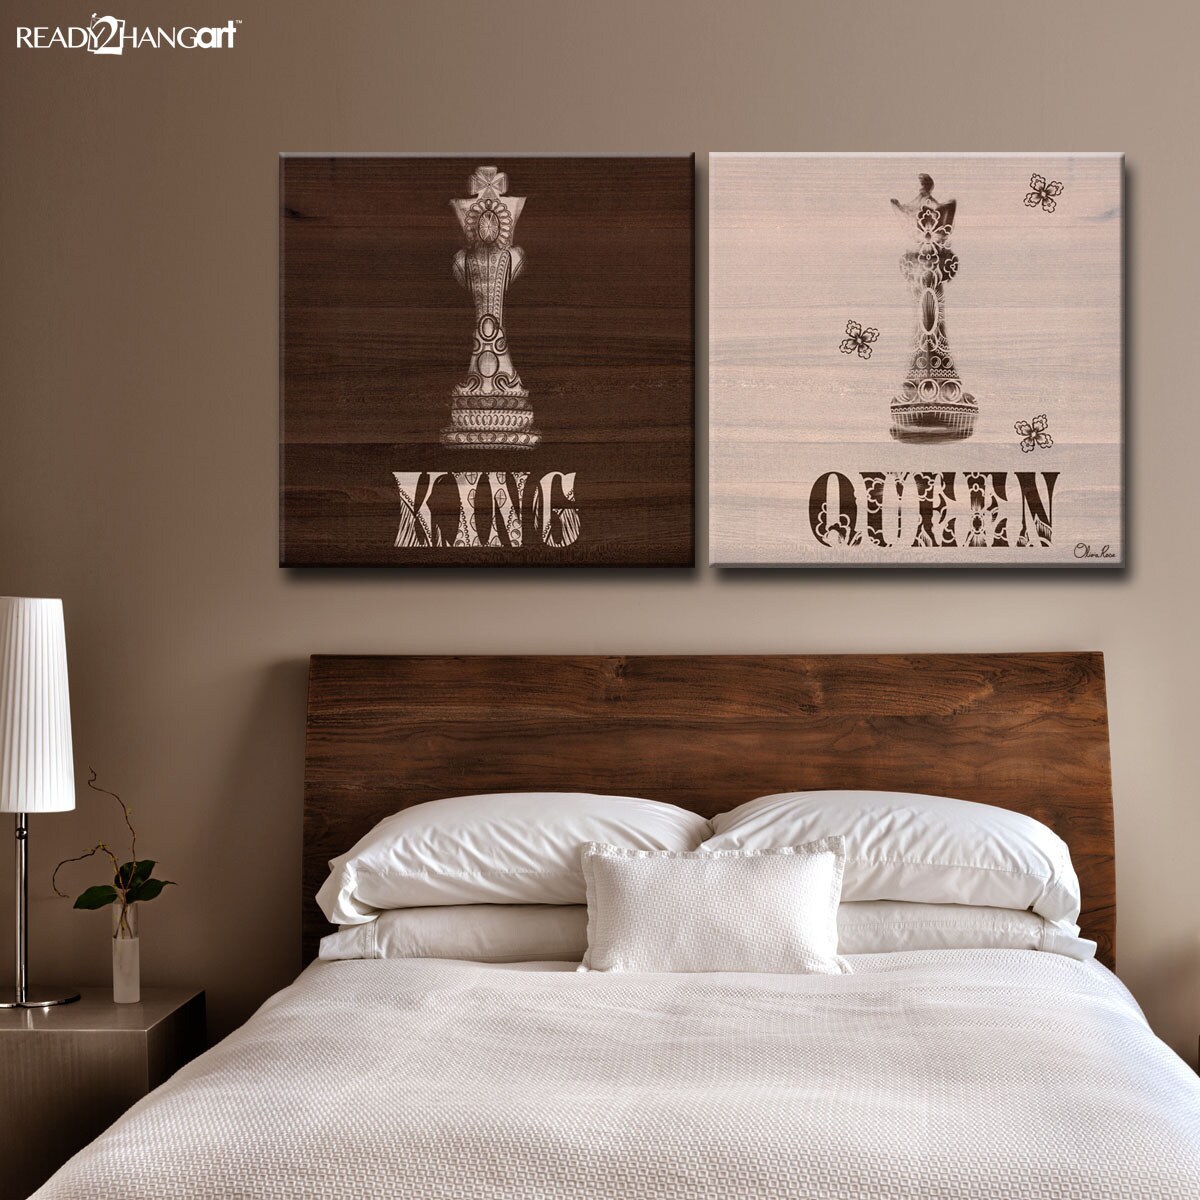 Shop Gracewood Hollow Her King His Queen By Olivia Rose 2 Piece Canvas Art Set On Sale Overstock 19754302